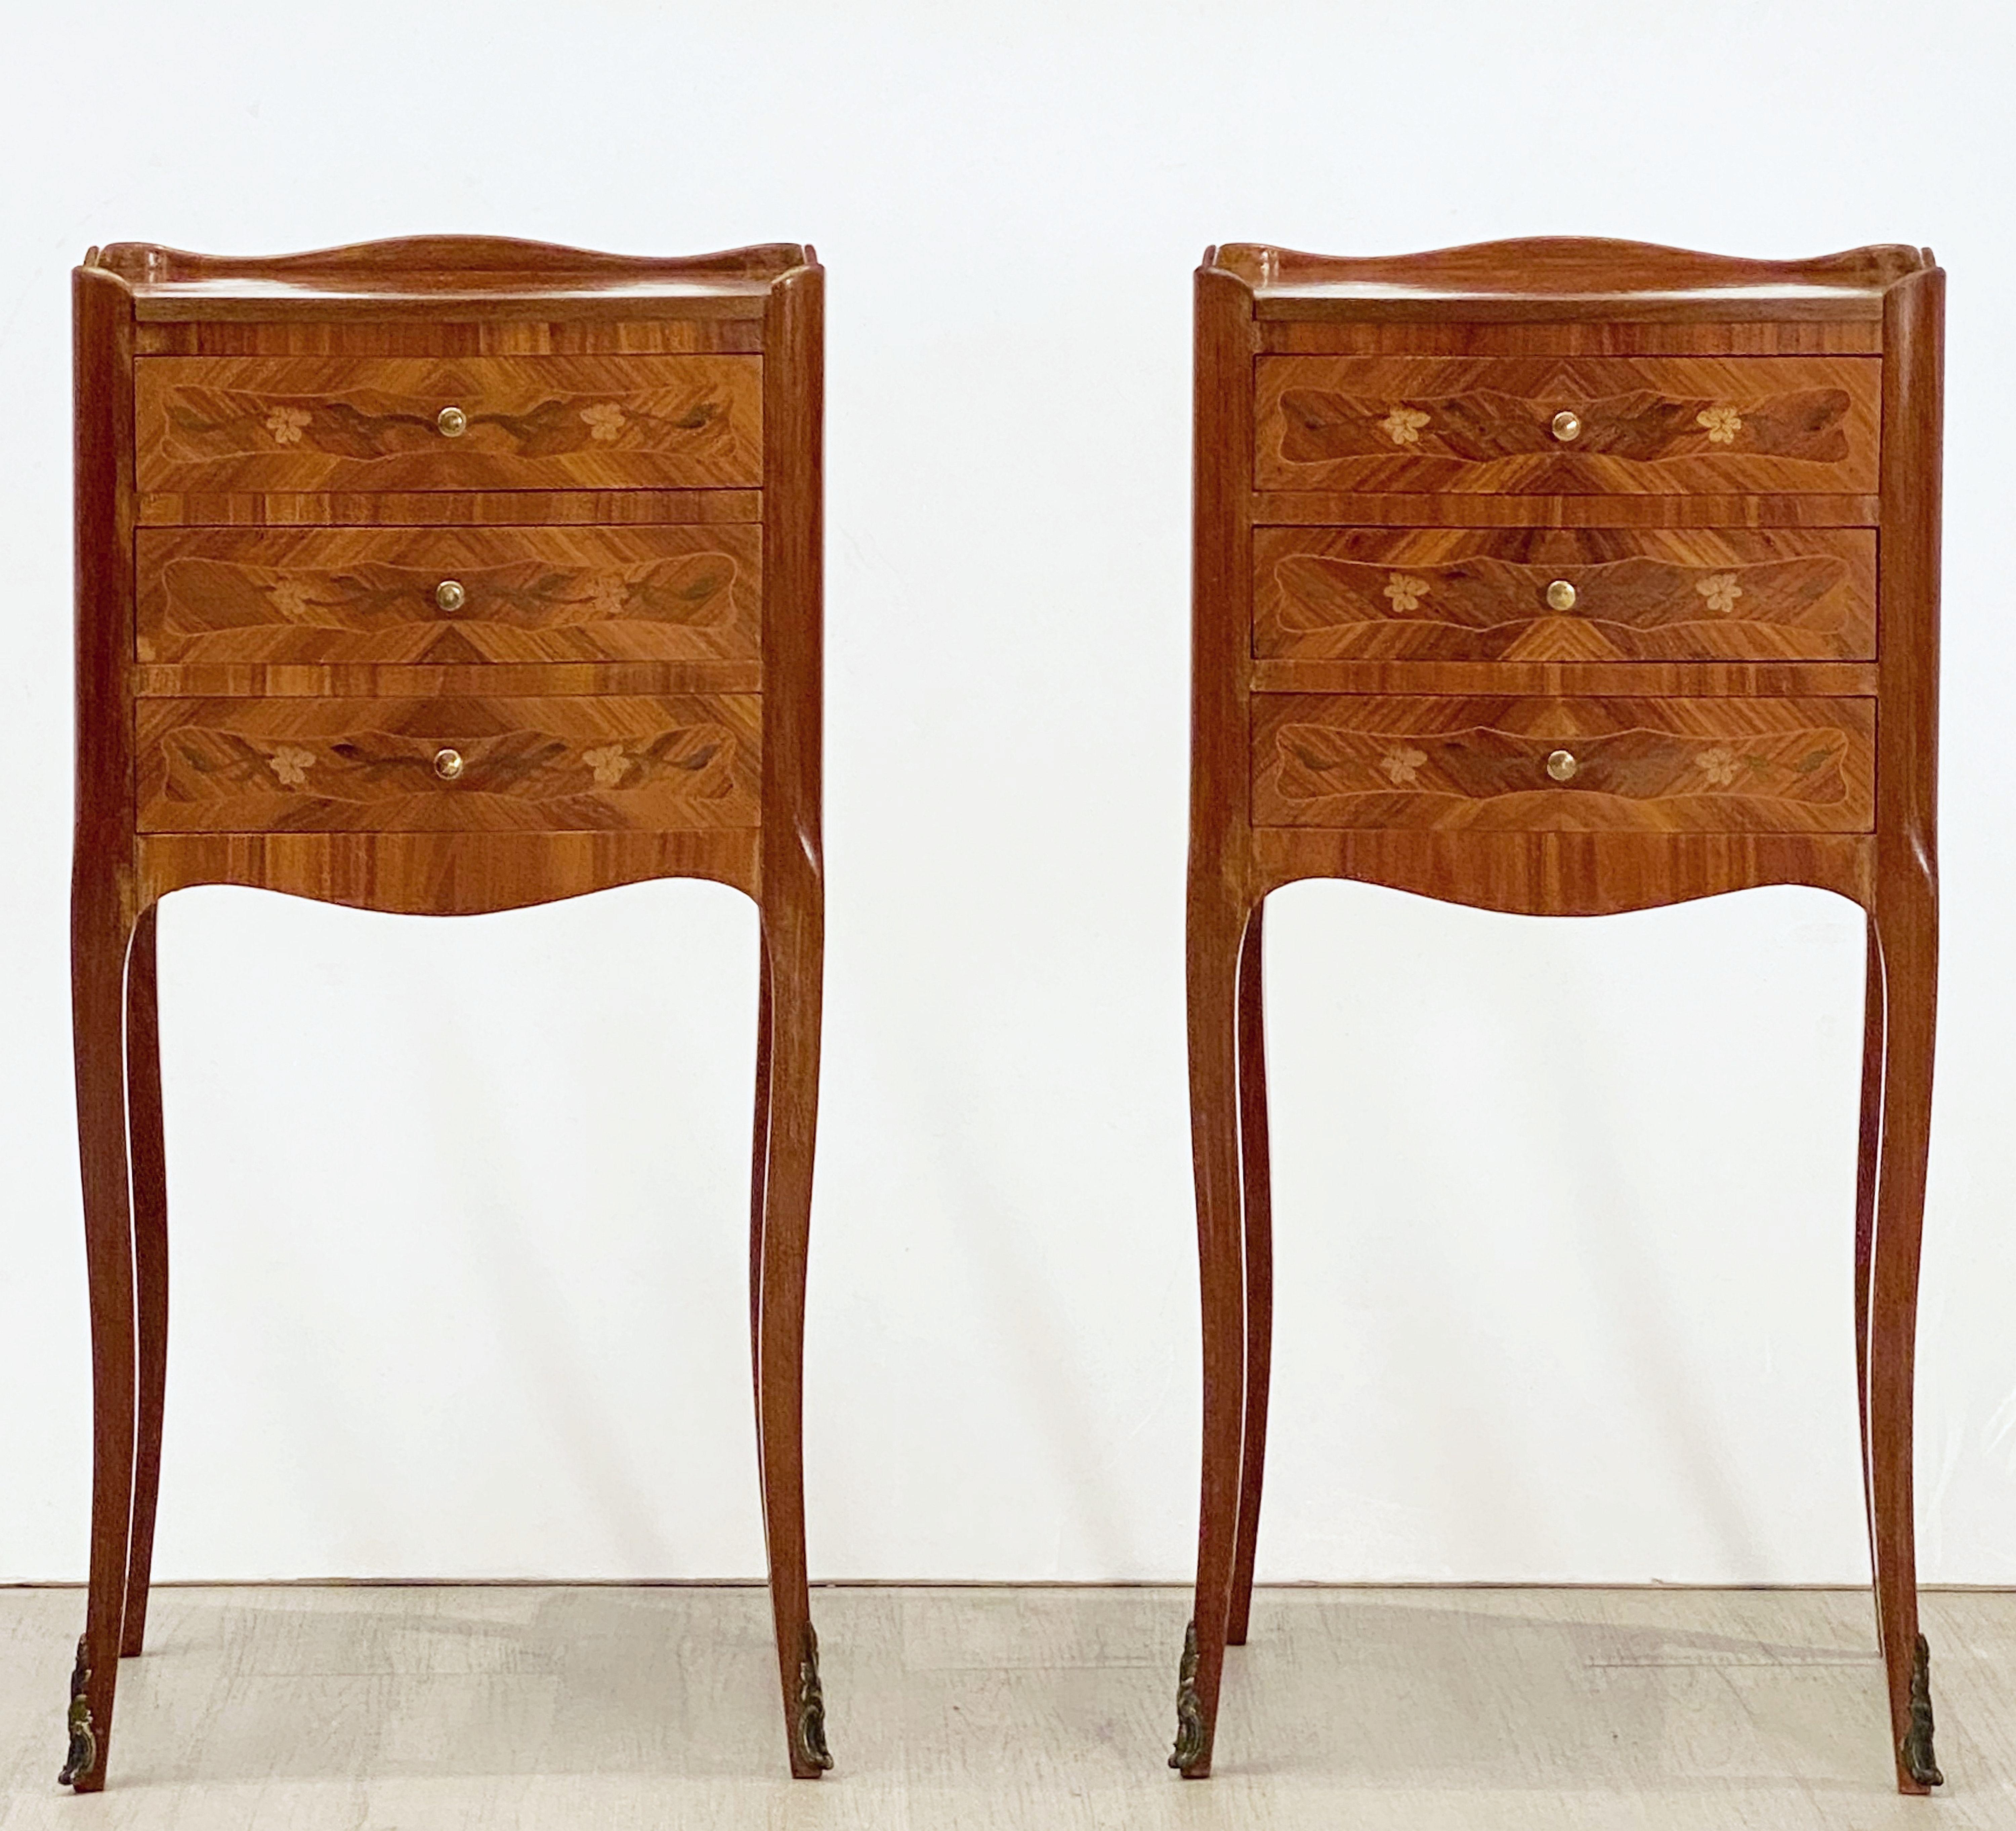 A fine pair of French bedside end tables or nightstands, each stand featuring an inlaid top with serpentine gallery over a frieze.
Both with three inlaid drawers with brass pulls, marquetry sides and apron bottom, and set upon four cabriole legs